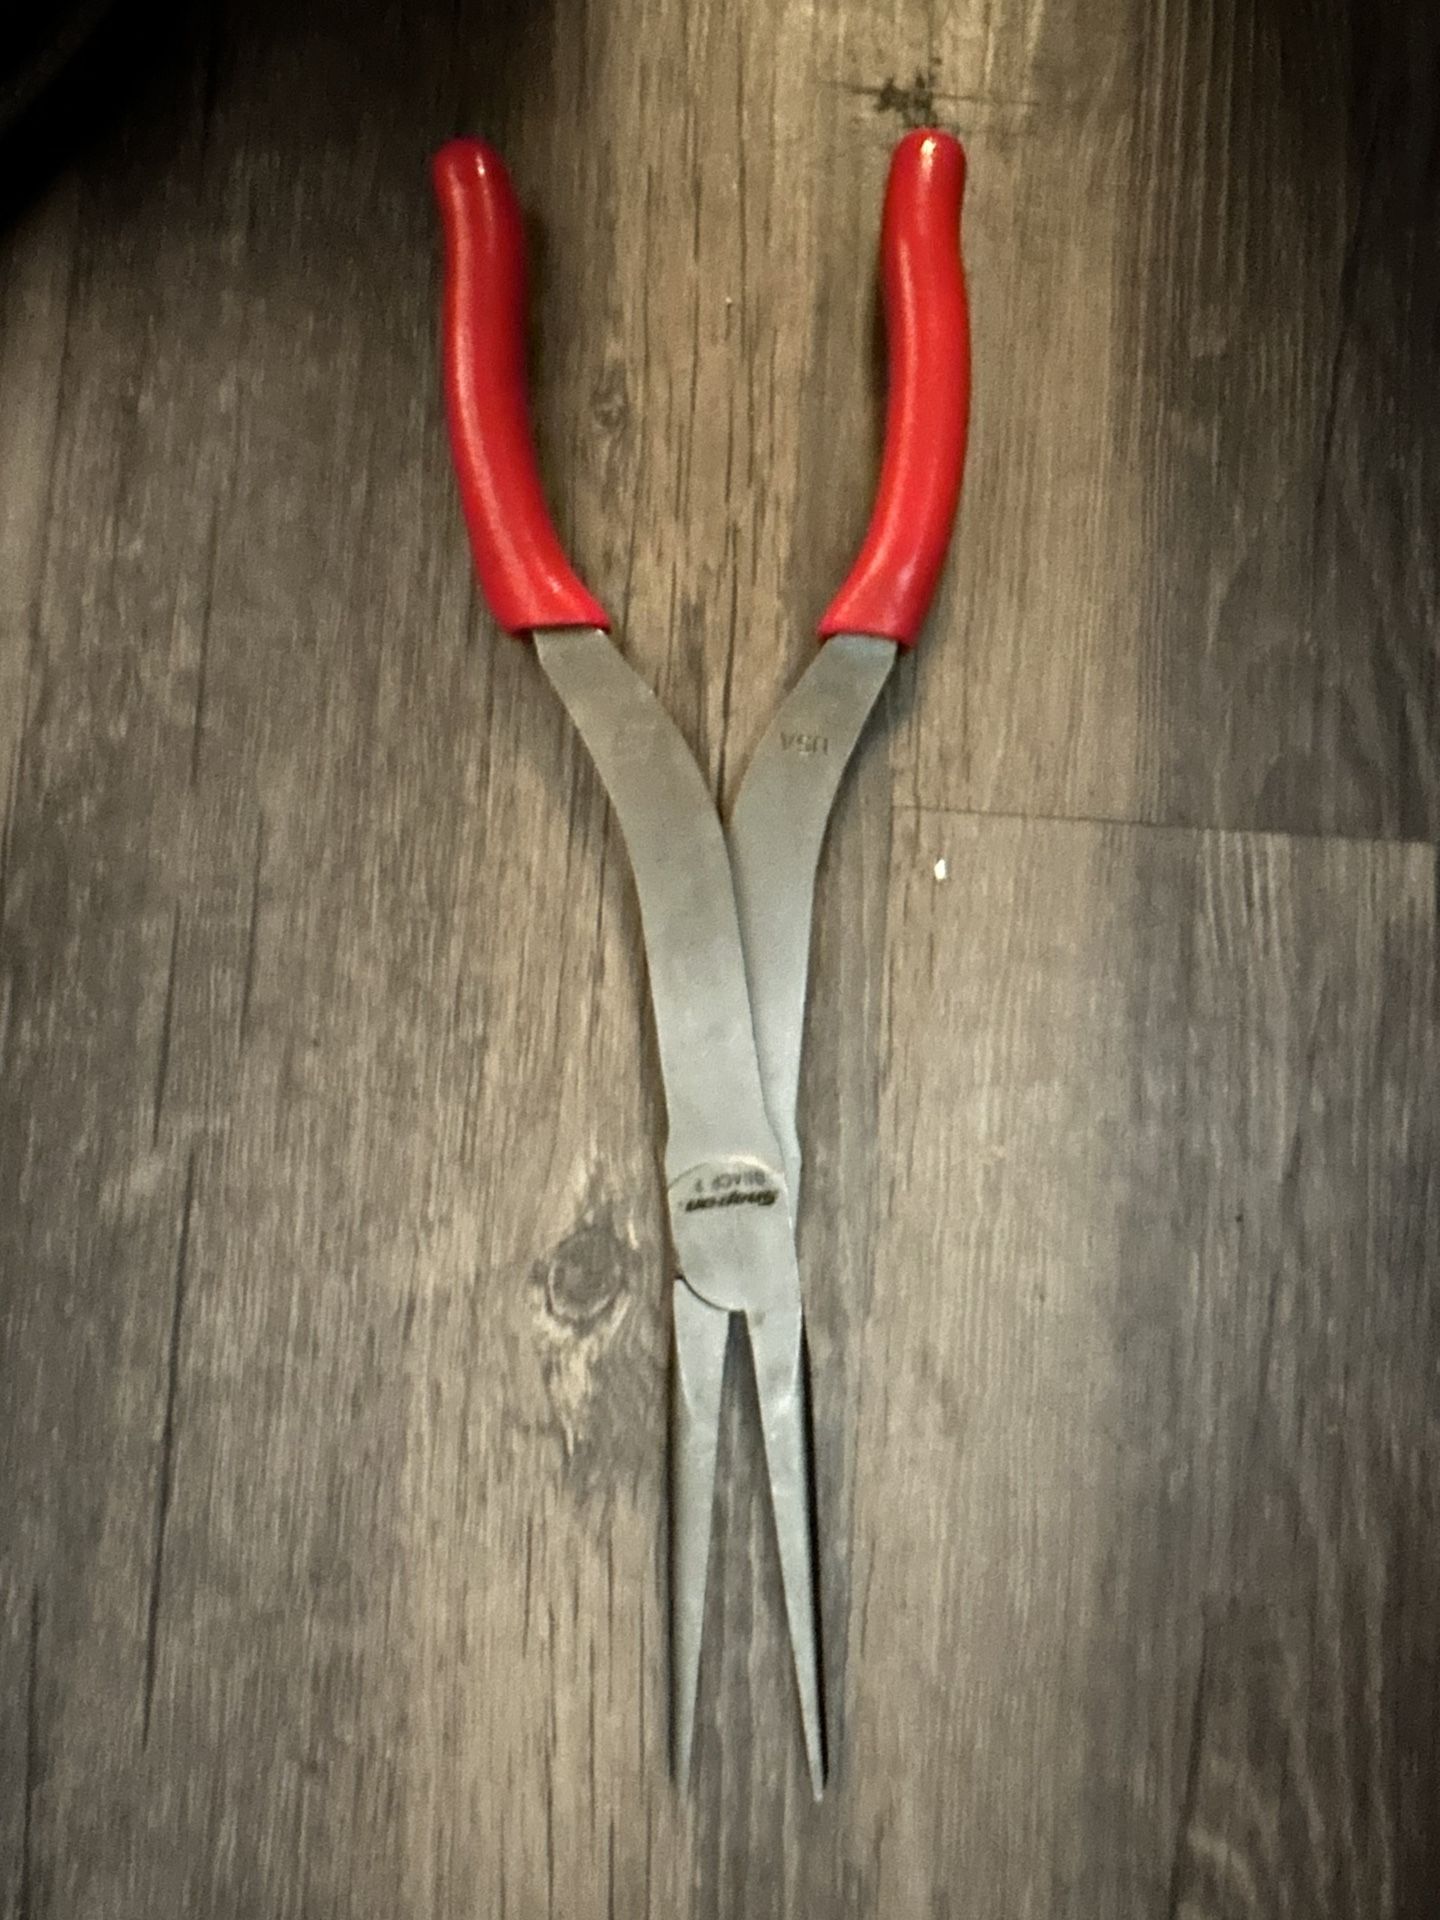 Snap On Long Handle Needle Nose Pliers. 